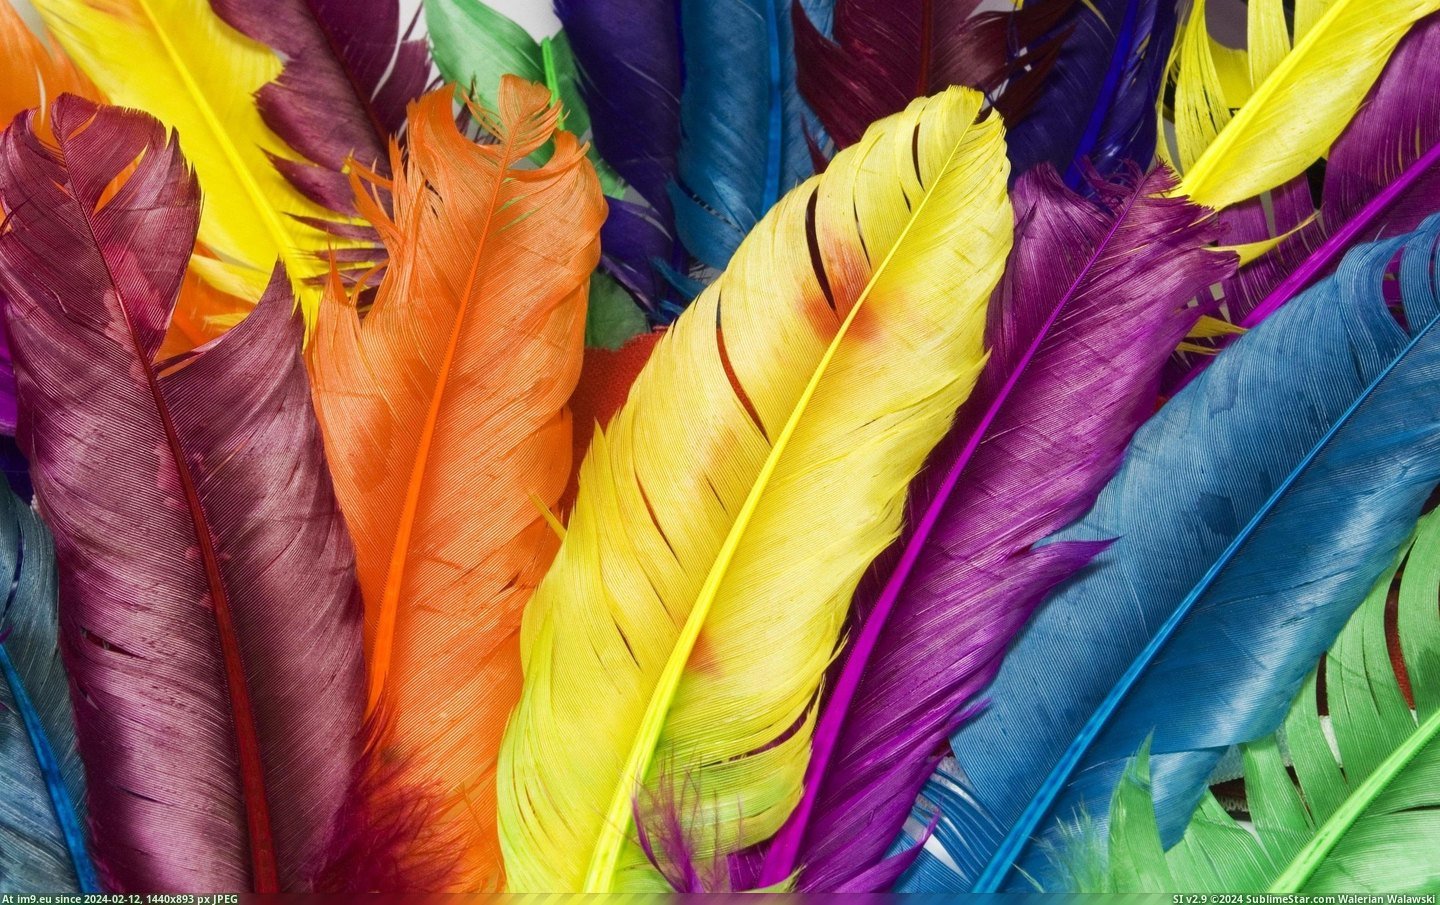 #Wallpaper #Beautiful #Feathers #Wide #Colors Feathers In Colors Wide HD Wallpaper Pic. (Изображение из альбом Unique HD Wallpapers))